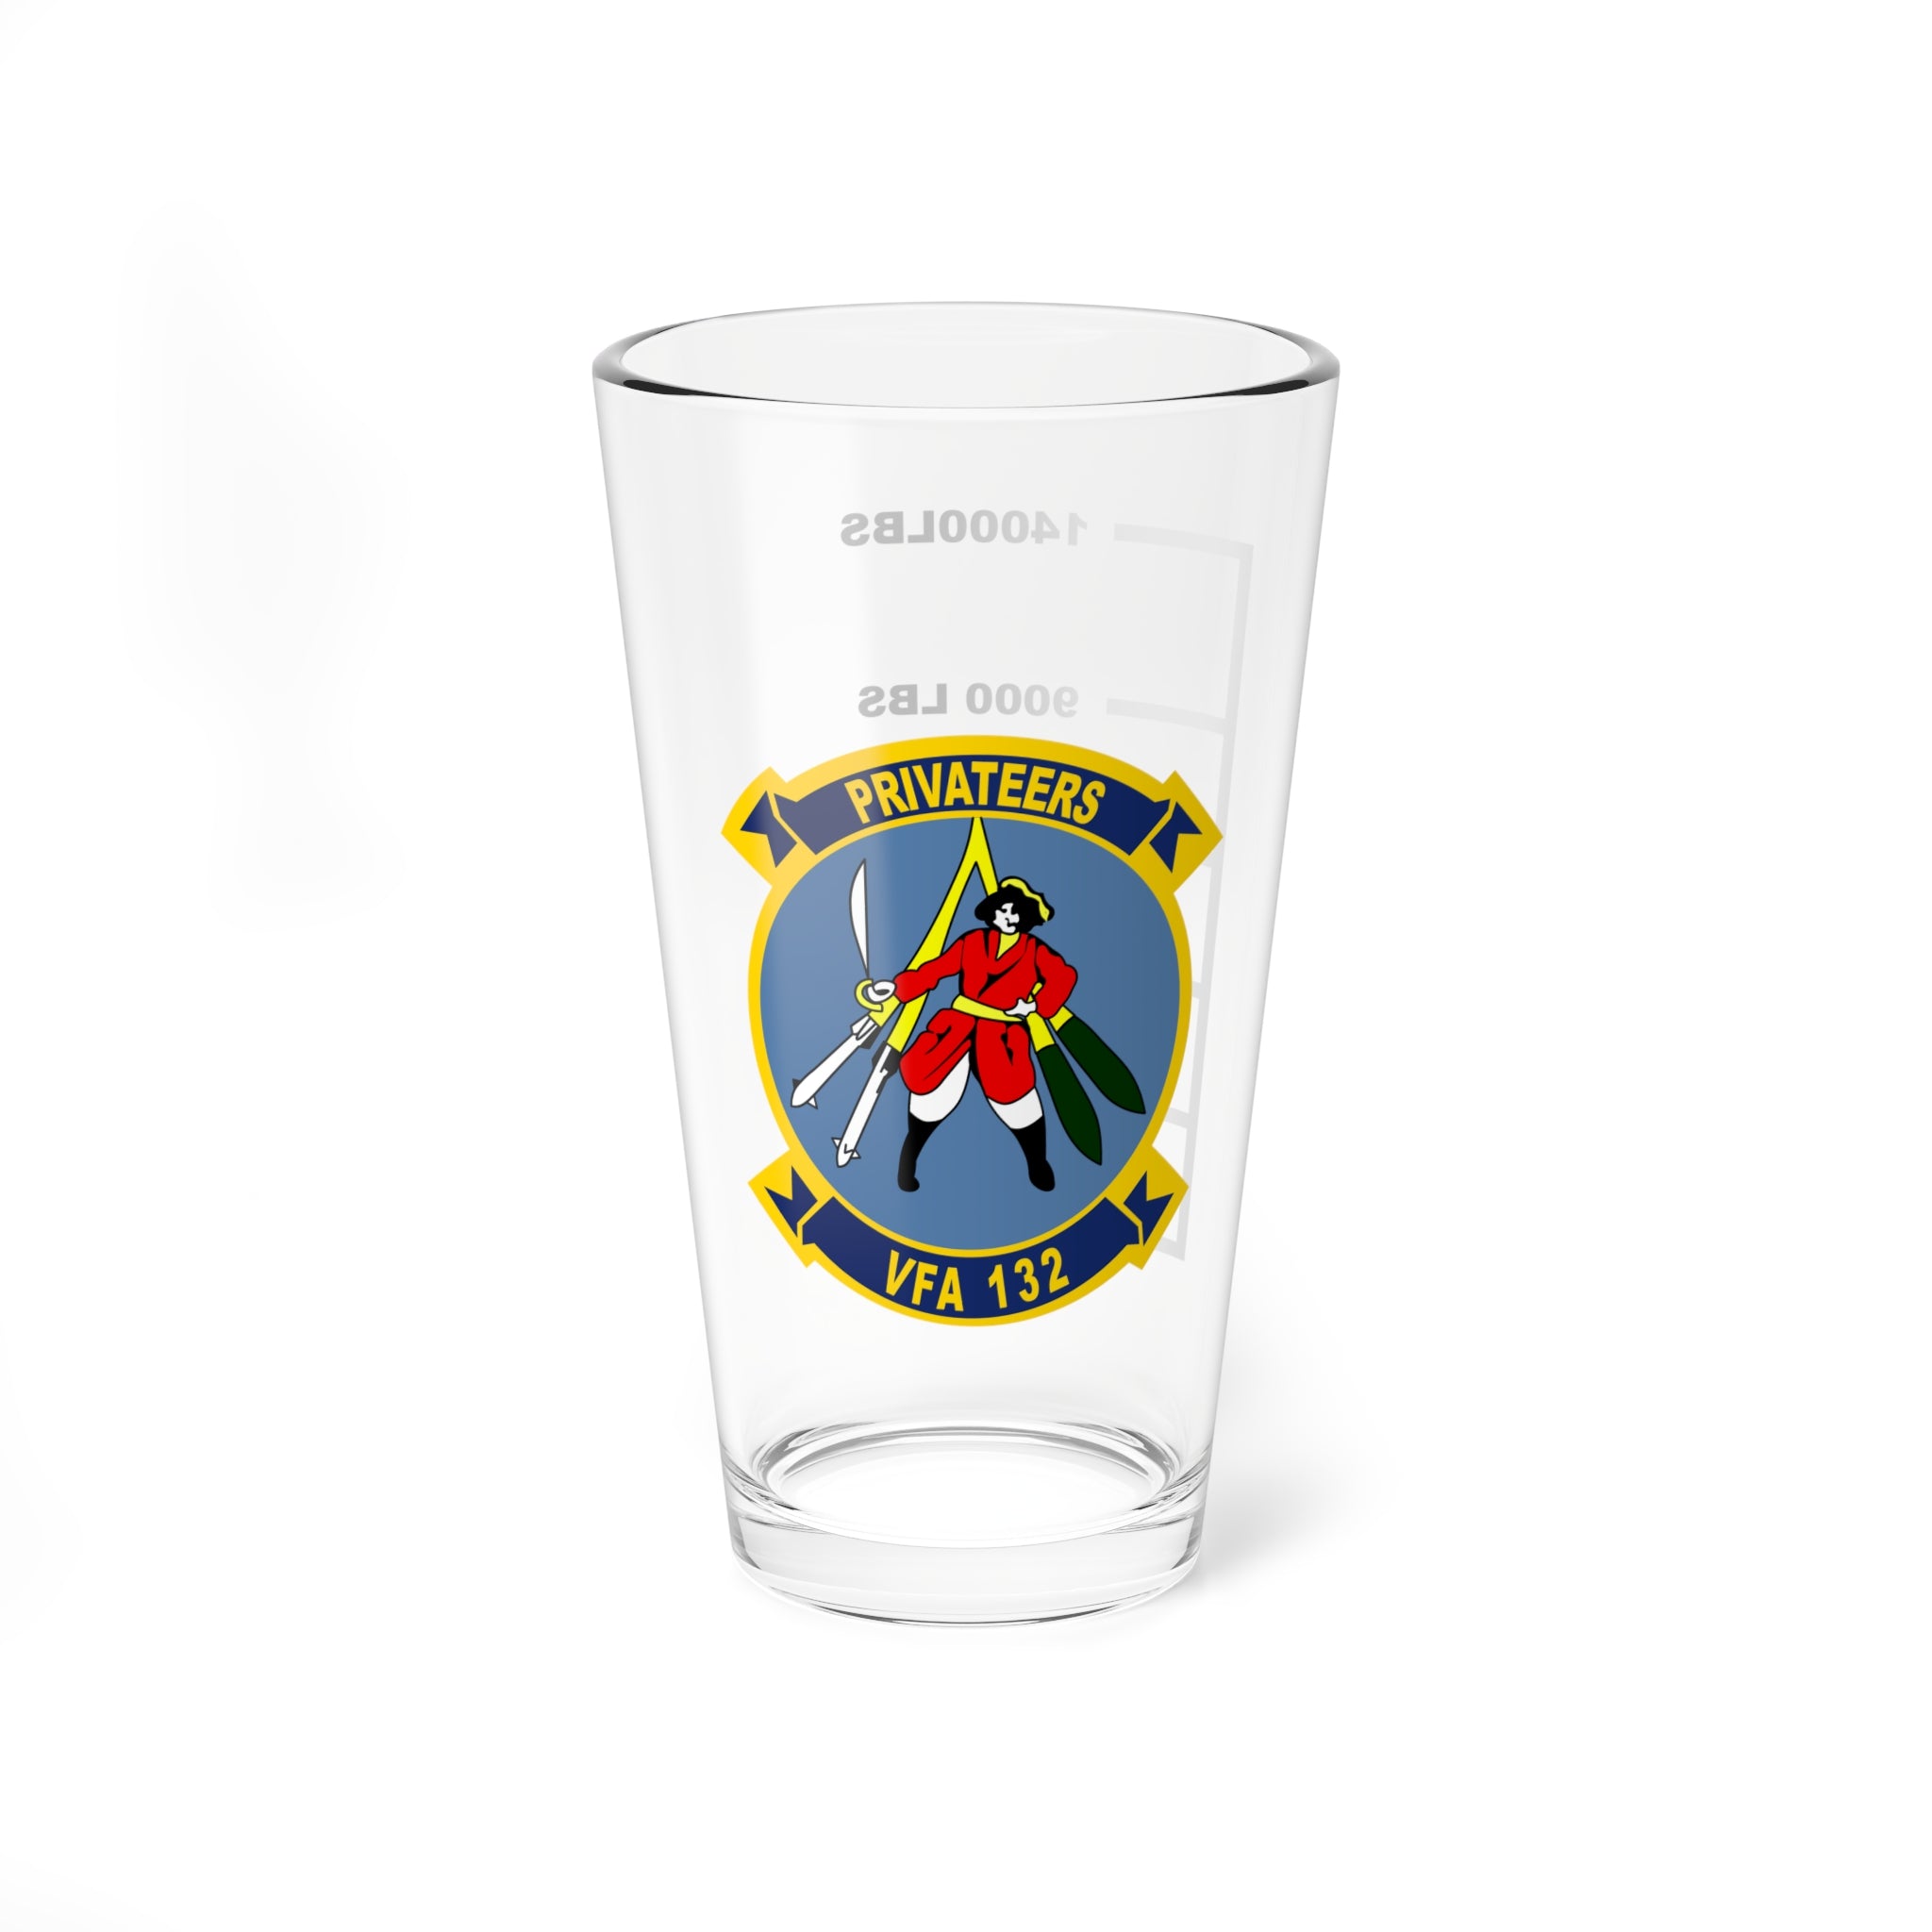 VFA-132 "Privateers" Fuel Low Pint Glass, Navy Strike Fighter Squadron flying the F/A-18 Hornet